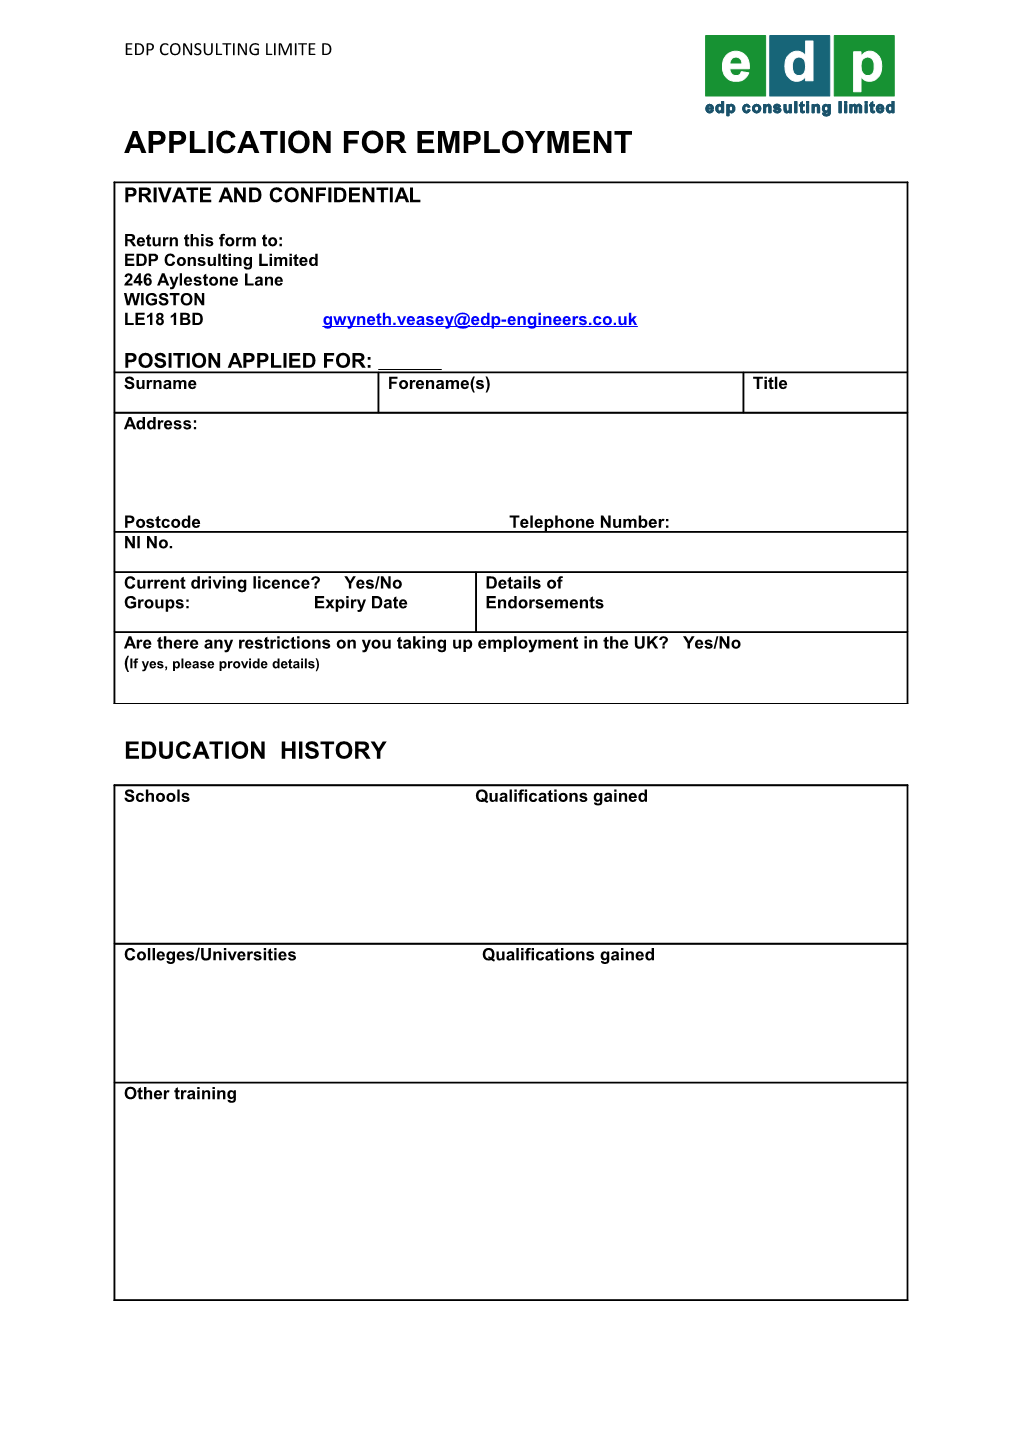 Application for Employment s60